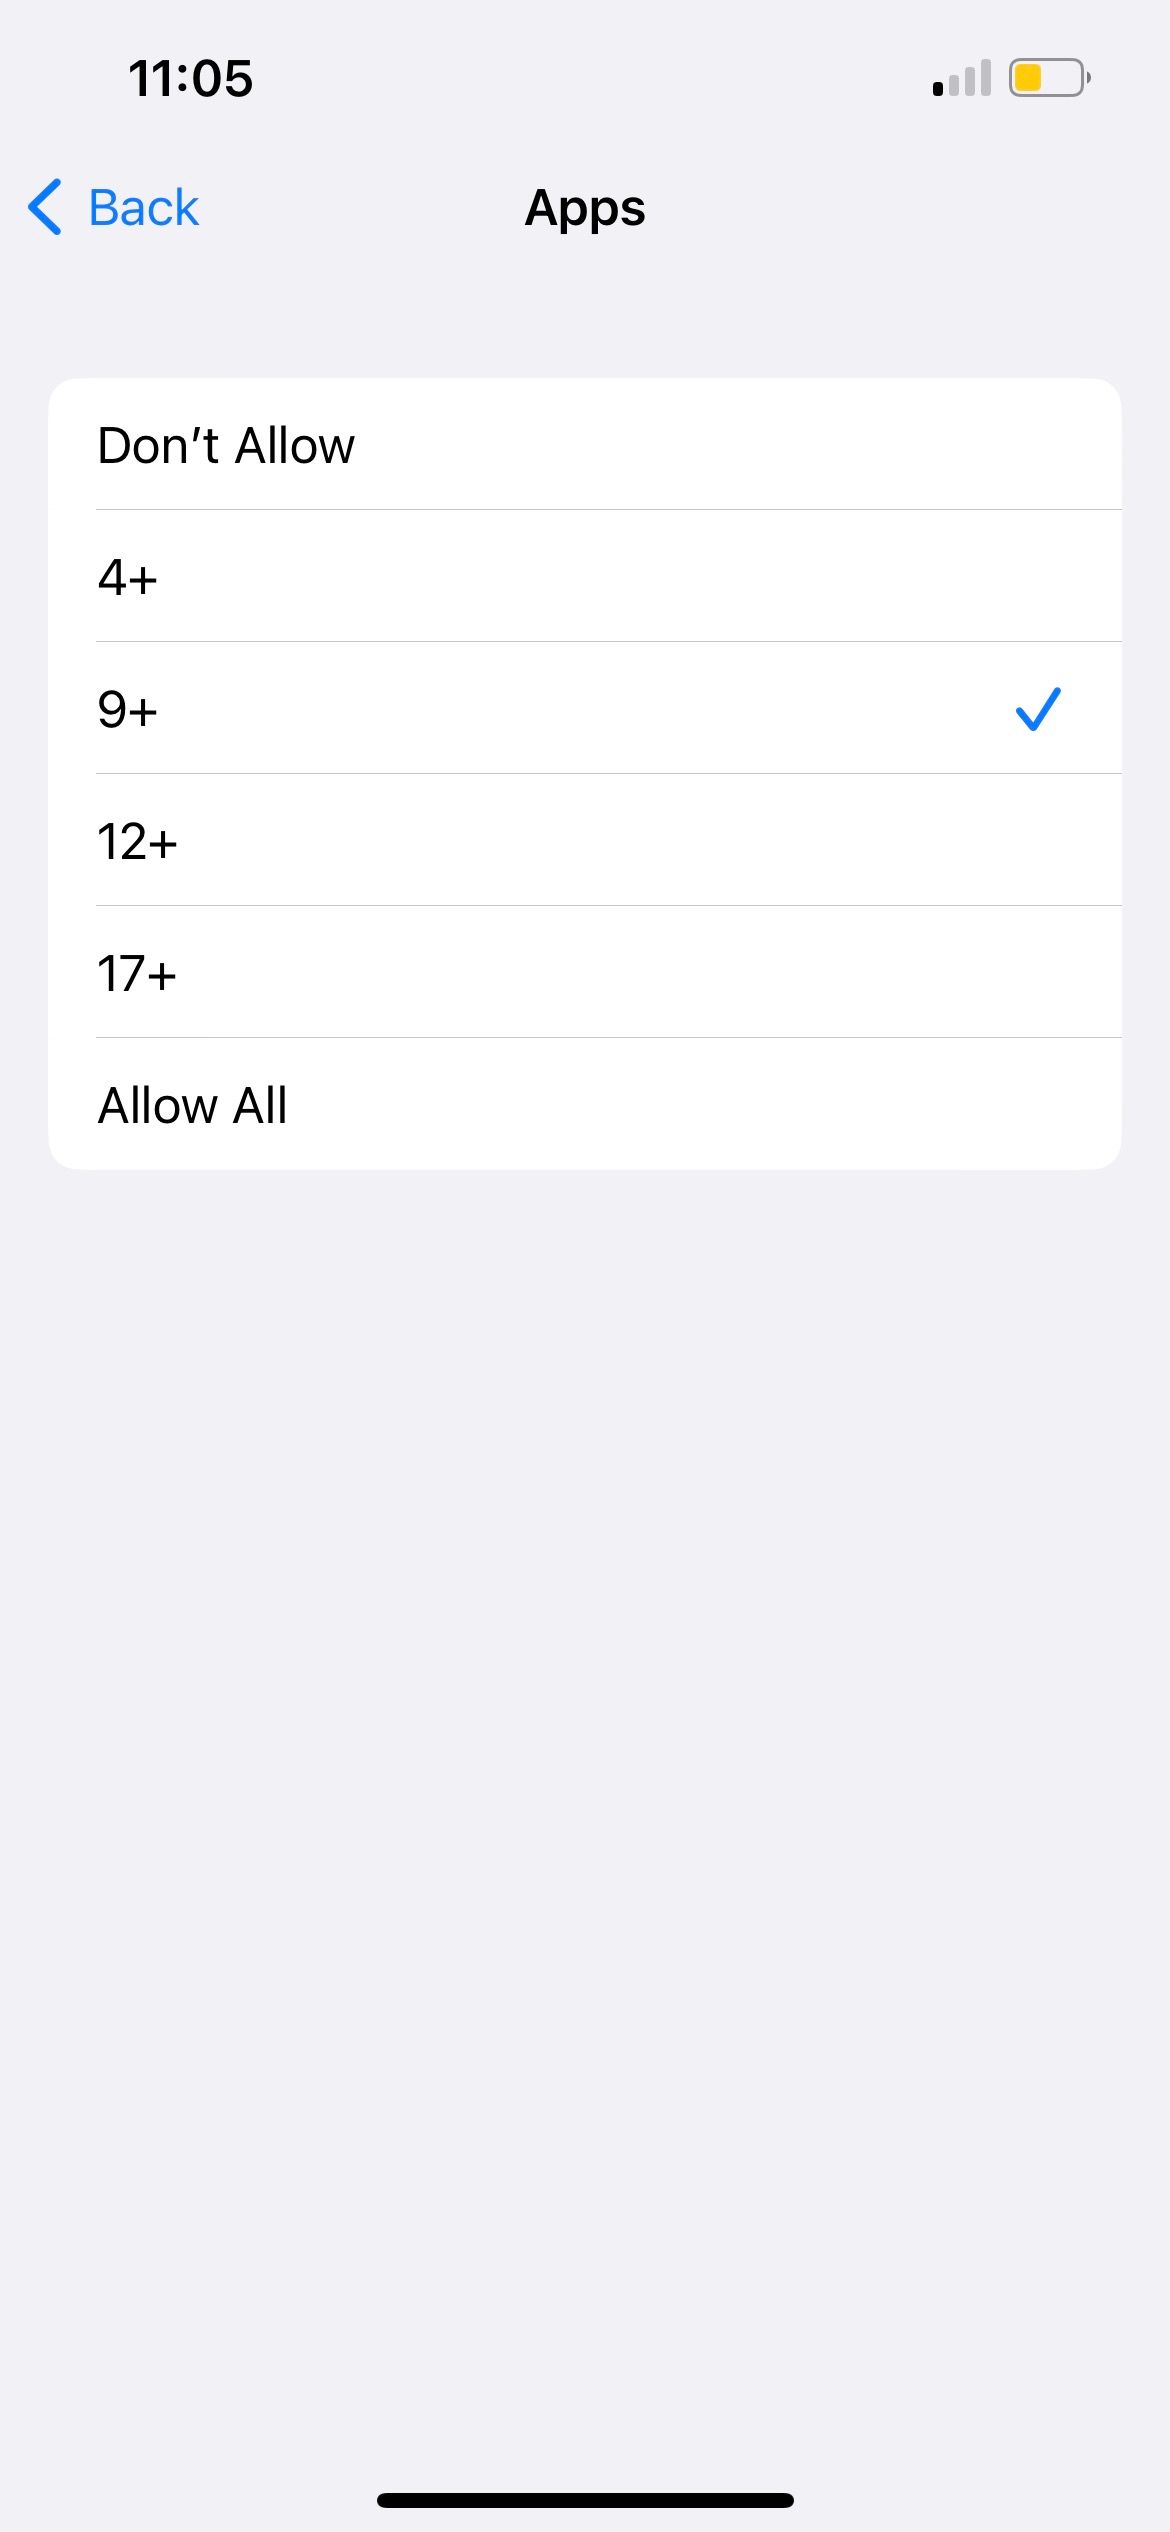 iphone app age rating setting